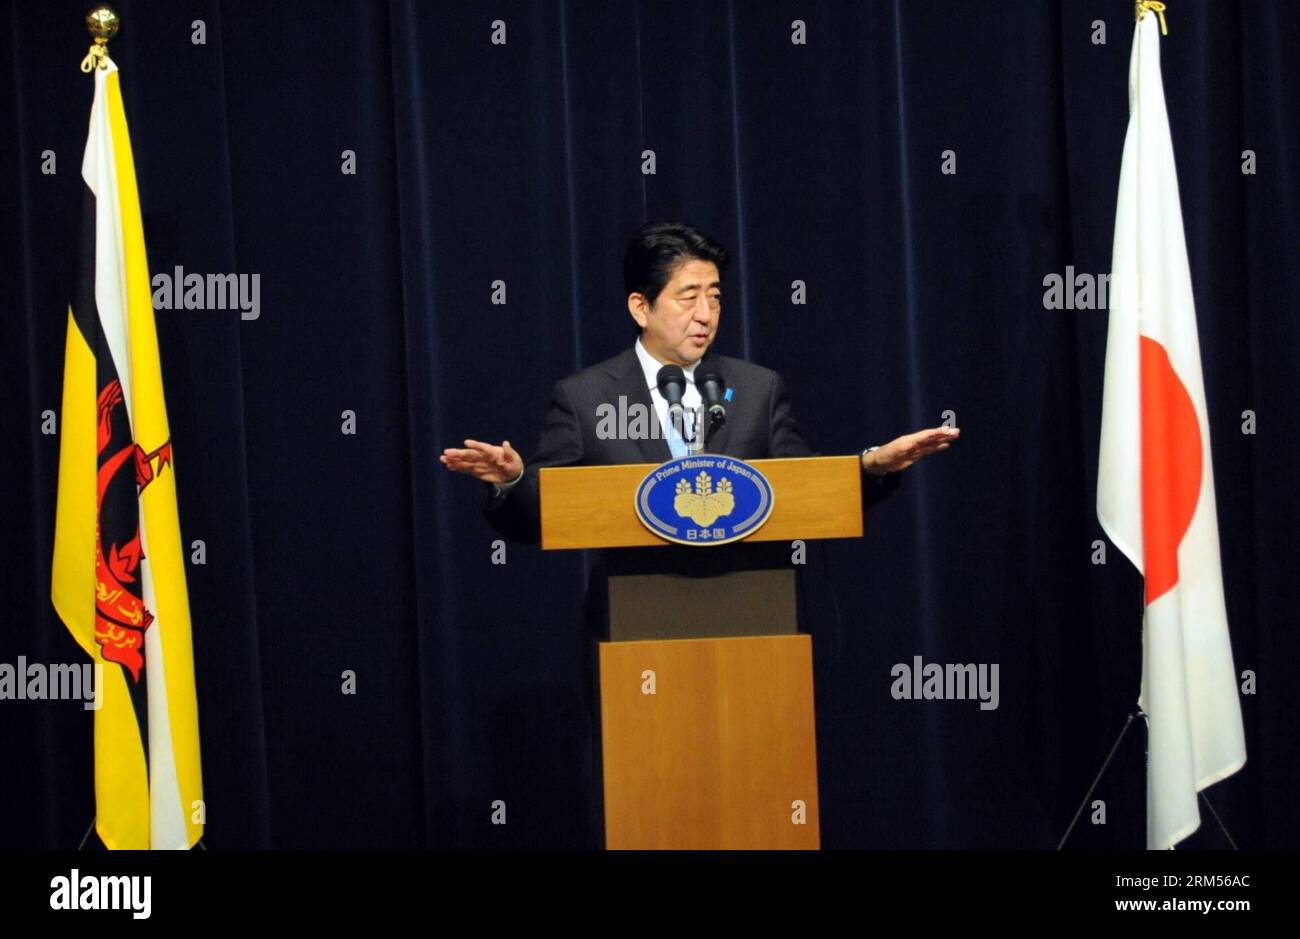 Bildnummer: 60585991  Datum: 10.10.2013  Copyright: imago/Xinhua (131010) -- BANDAR SERI BEGAWAN, Oct. 10, 2013 (Xinhua) -- Japanese Prime Minister Shinzo Abe speaks during a press conference in Bandar Seri Begawan, capital of Brunei, on Oct. 10, 2013. Japanese Prime Minister Shinzo Abe said here Thursday that the U.S.-led Trans-Pacific Partnership (TPP) is a pathway to realize a market befitting the growth center of the 21st century. (Xinhua/Liu Tian) BRUNEI-BANDAR SERI BEGAWAN-SHINZO ABE-PRESS CONFERENCE PUBLICATIONxNOTxINxCHN People Politik xcb x0x 2013 quer      60585991 Date 10 10 2013 Co Stock Photo